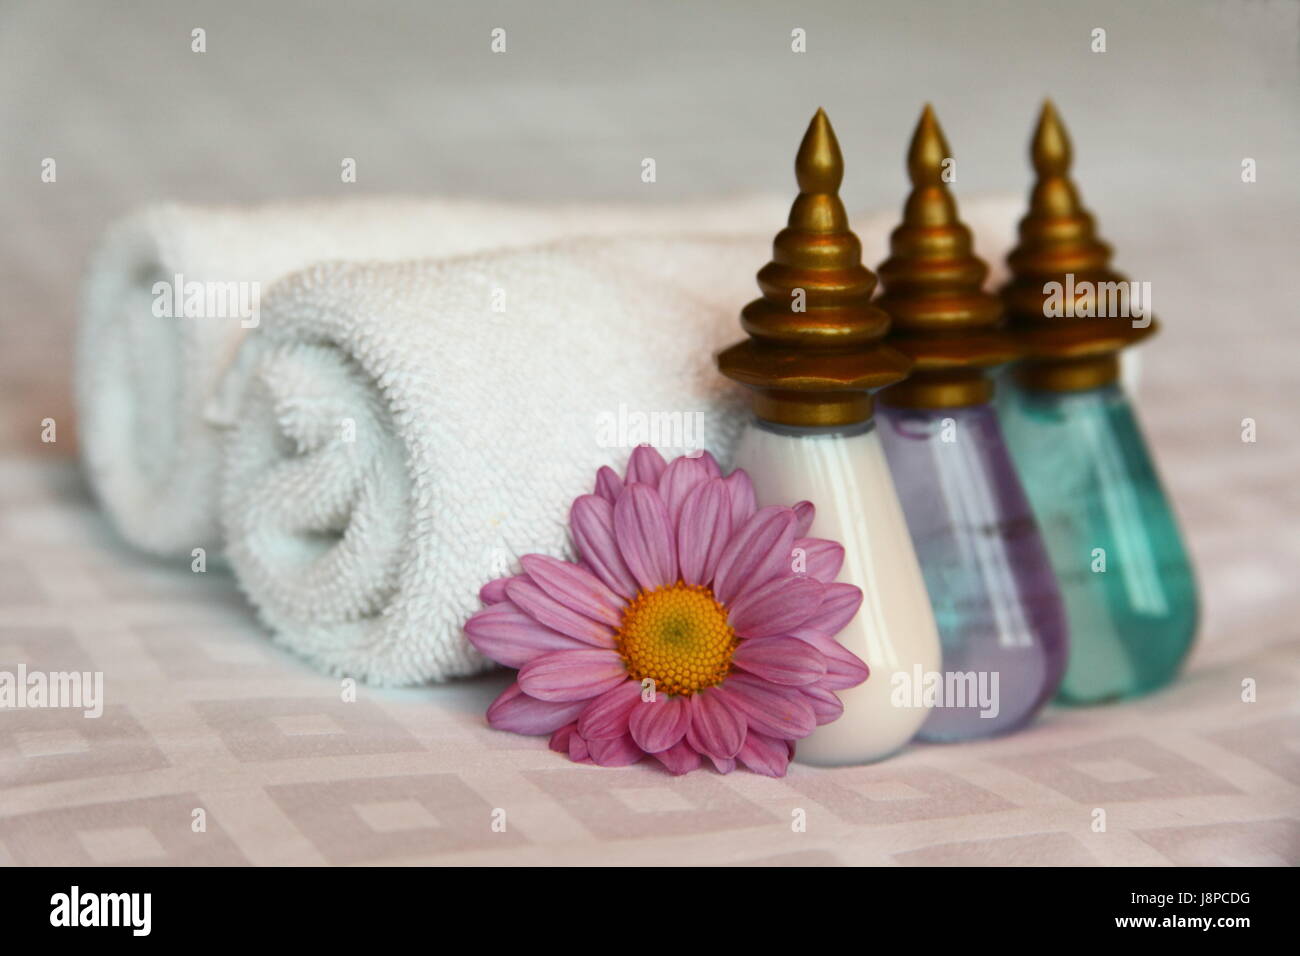 flower, plant, bed, hotel, towels, spa, wellness, room, blue, macro, close-up, Stock Photo